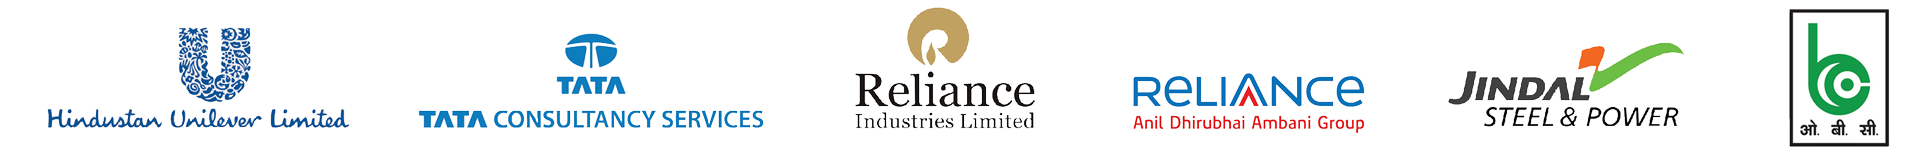 Our Clients - Hindustan Uilever Limited, TATA Consultancy Services, Reliance Industries Limited, Reliance, Jindal Steel & Power and OBC